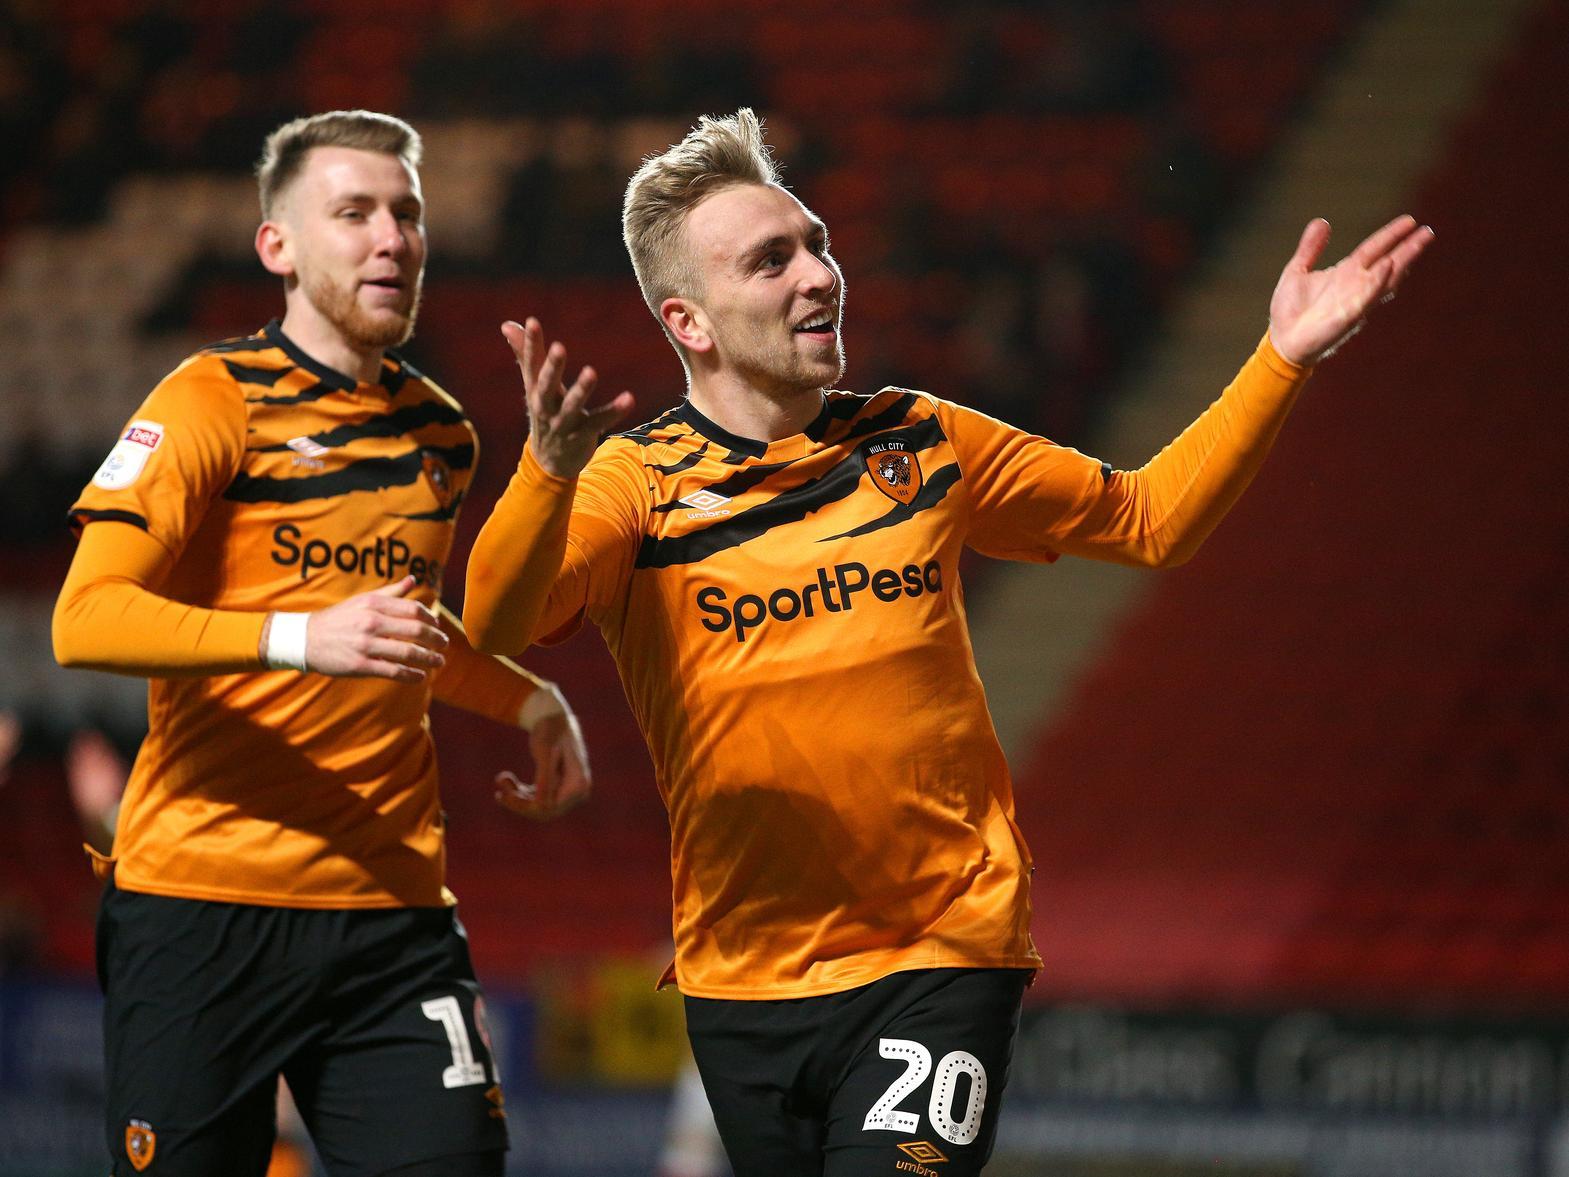 Leeds United's odds of signing Hull City talisman Jarrod Bowen have been slashed from 25/1 down to 10/1, but Aston Villa still look the most likely to sign him if he leaves this month. (Sky Bet)